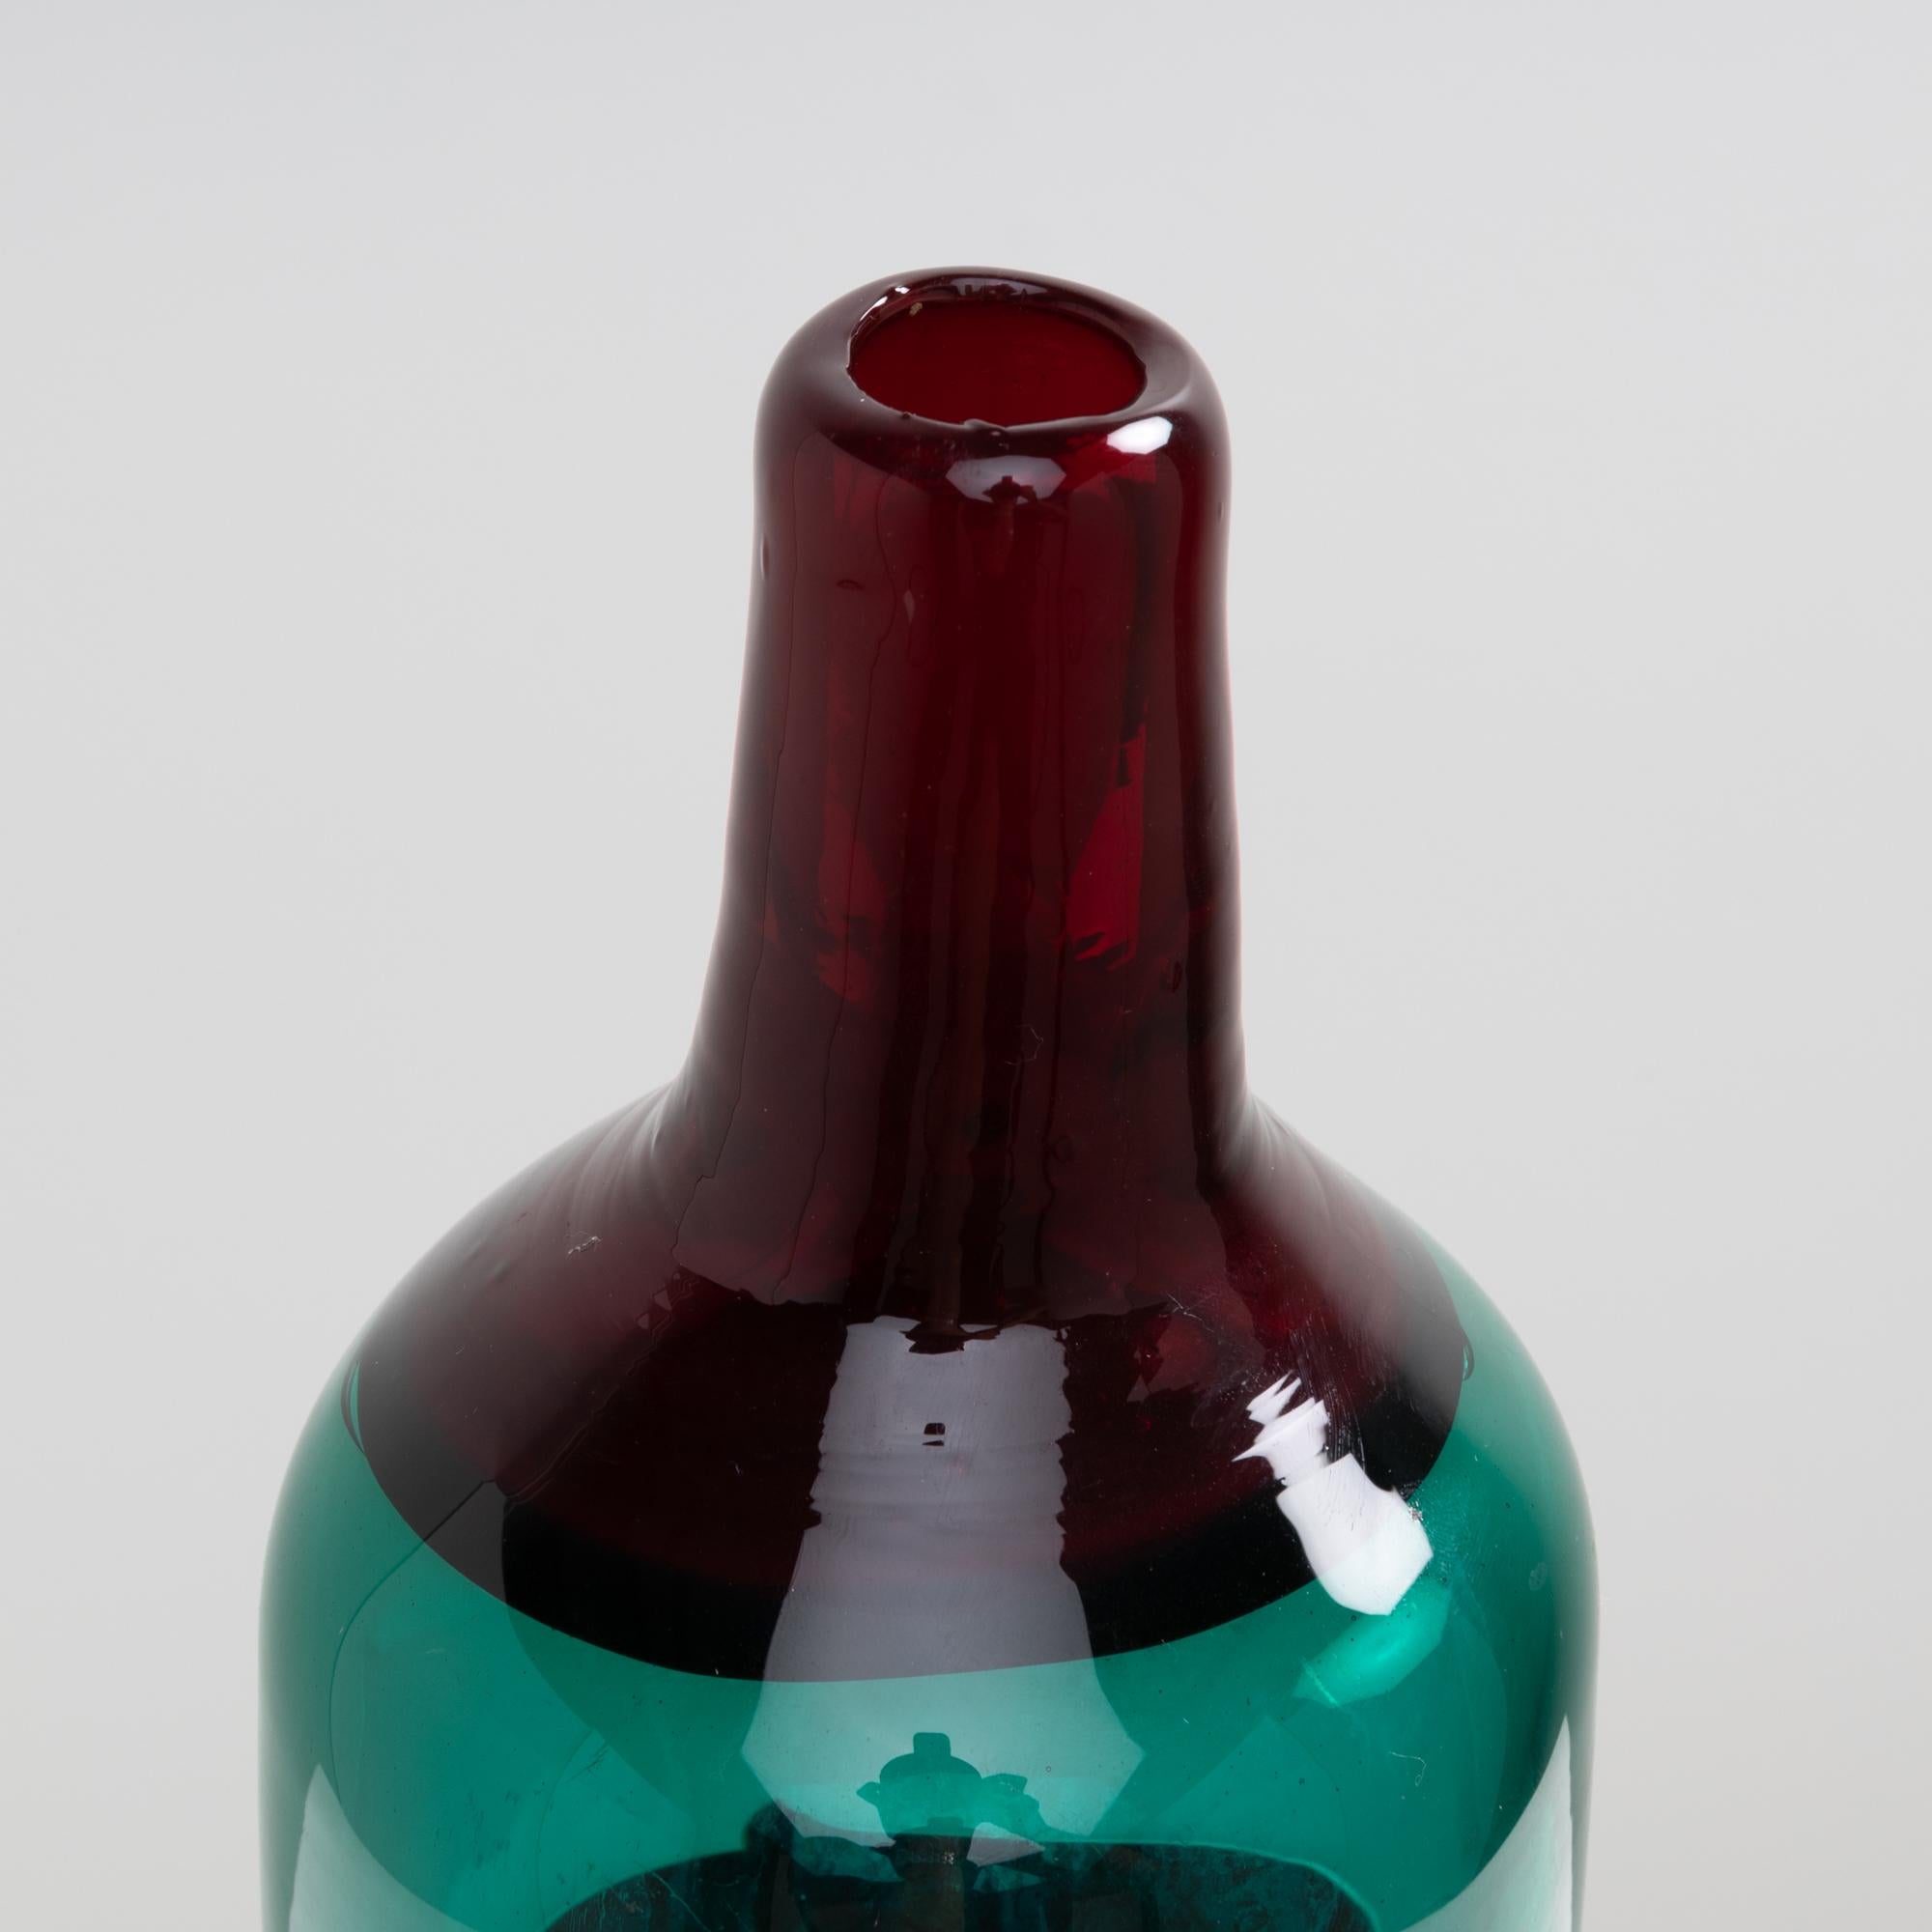 Large green blown glass bottle vase decorated with two hot applied red bands. 
The collar consists of a layer of translucent red glass which is itself different from the glass used for the body of the vase which have a white interior. 
